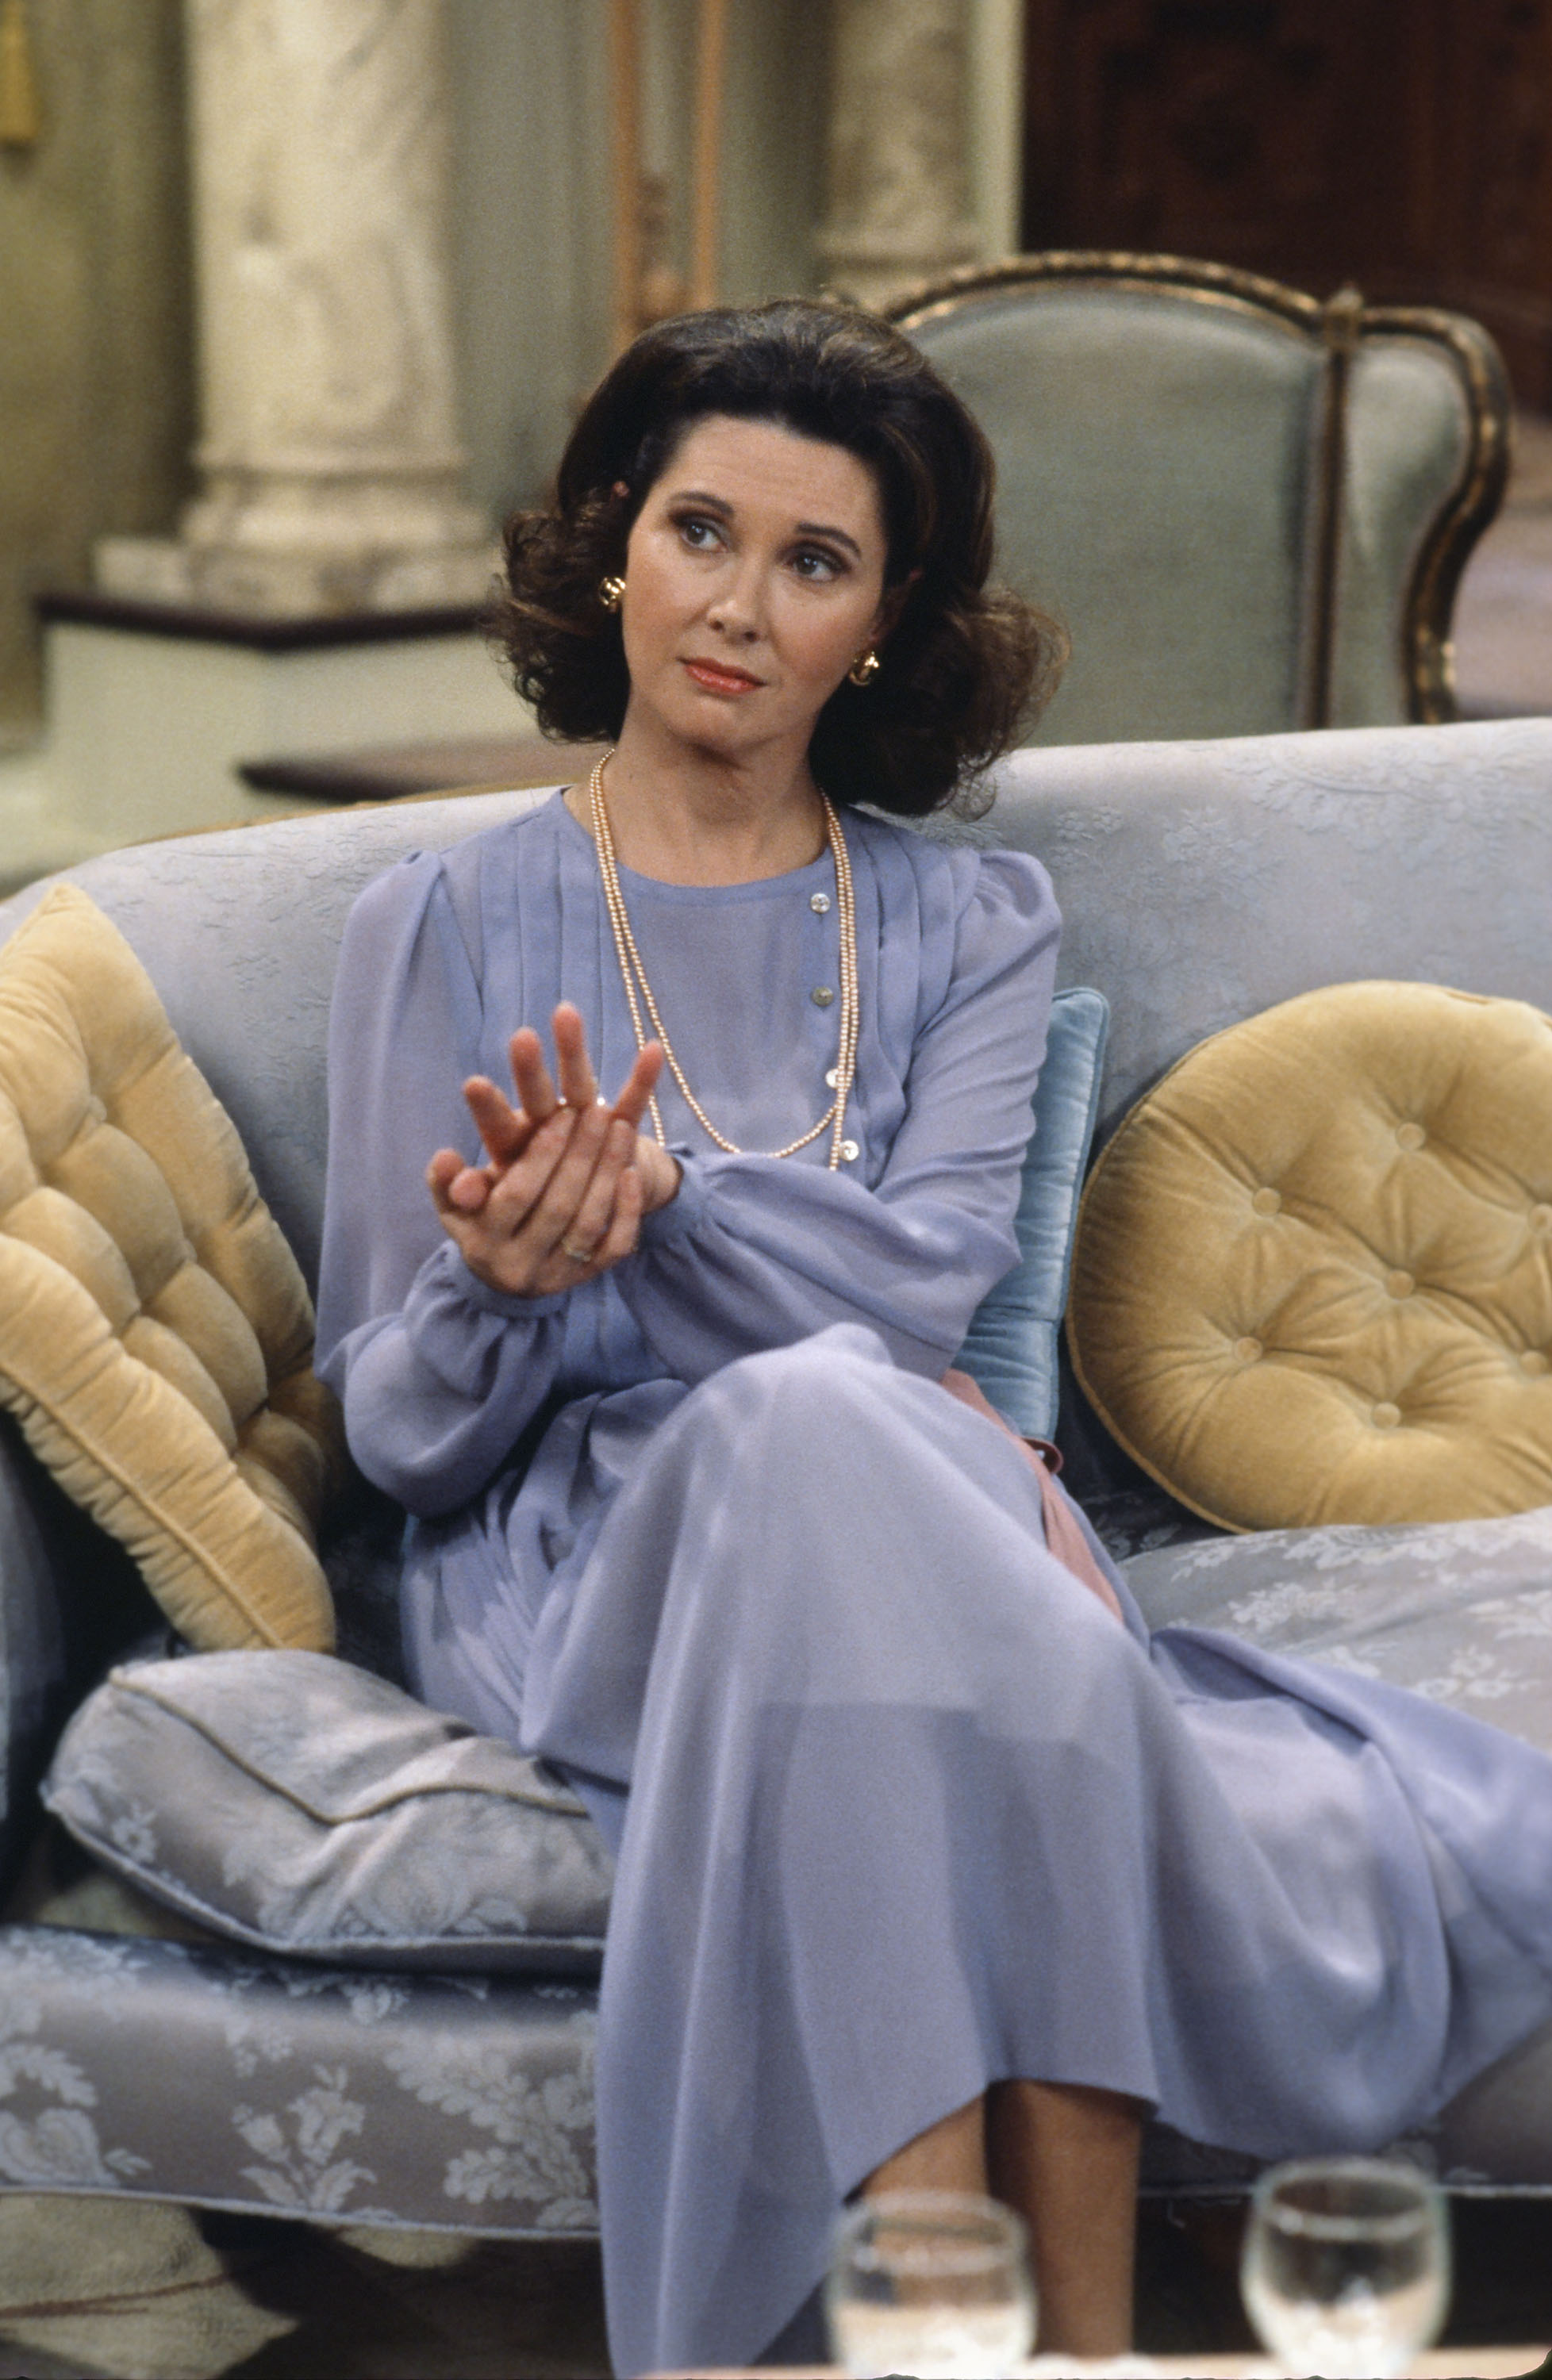 Elinor Donahue in "Diff'rent Strokes" in 1979 | Source: Getty Images